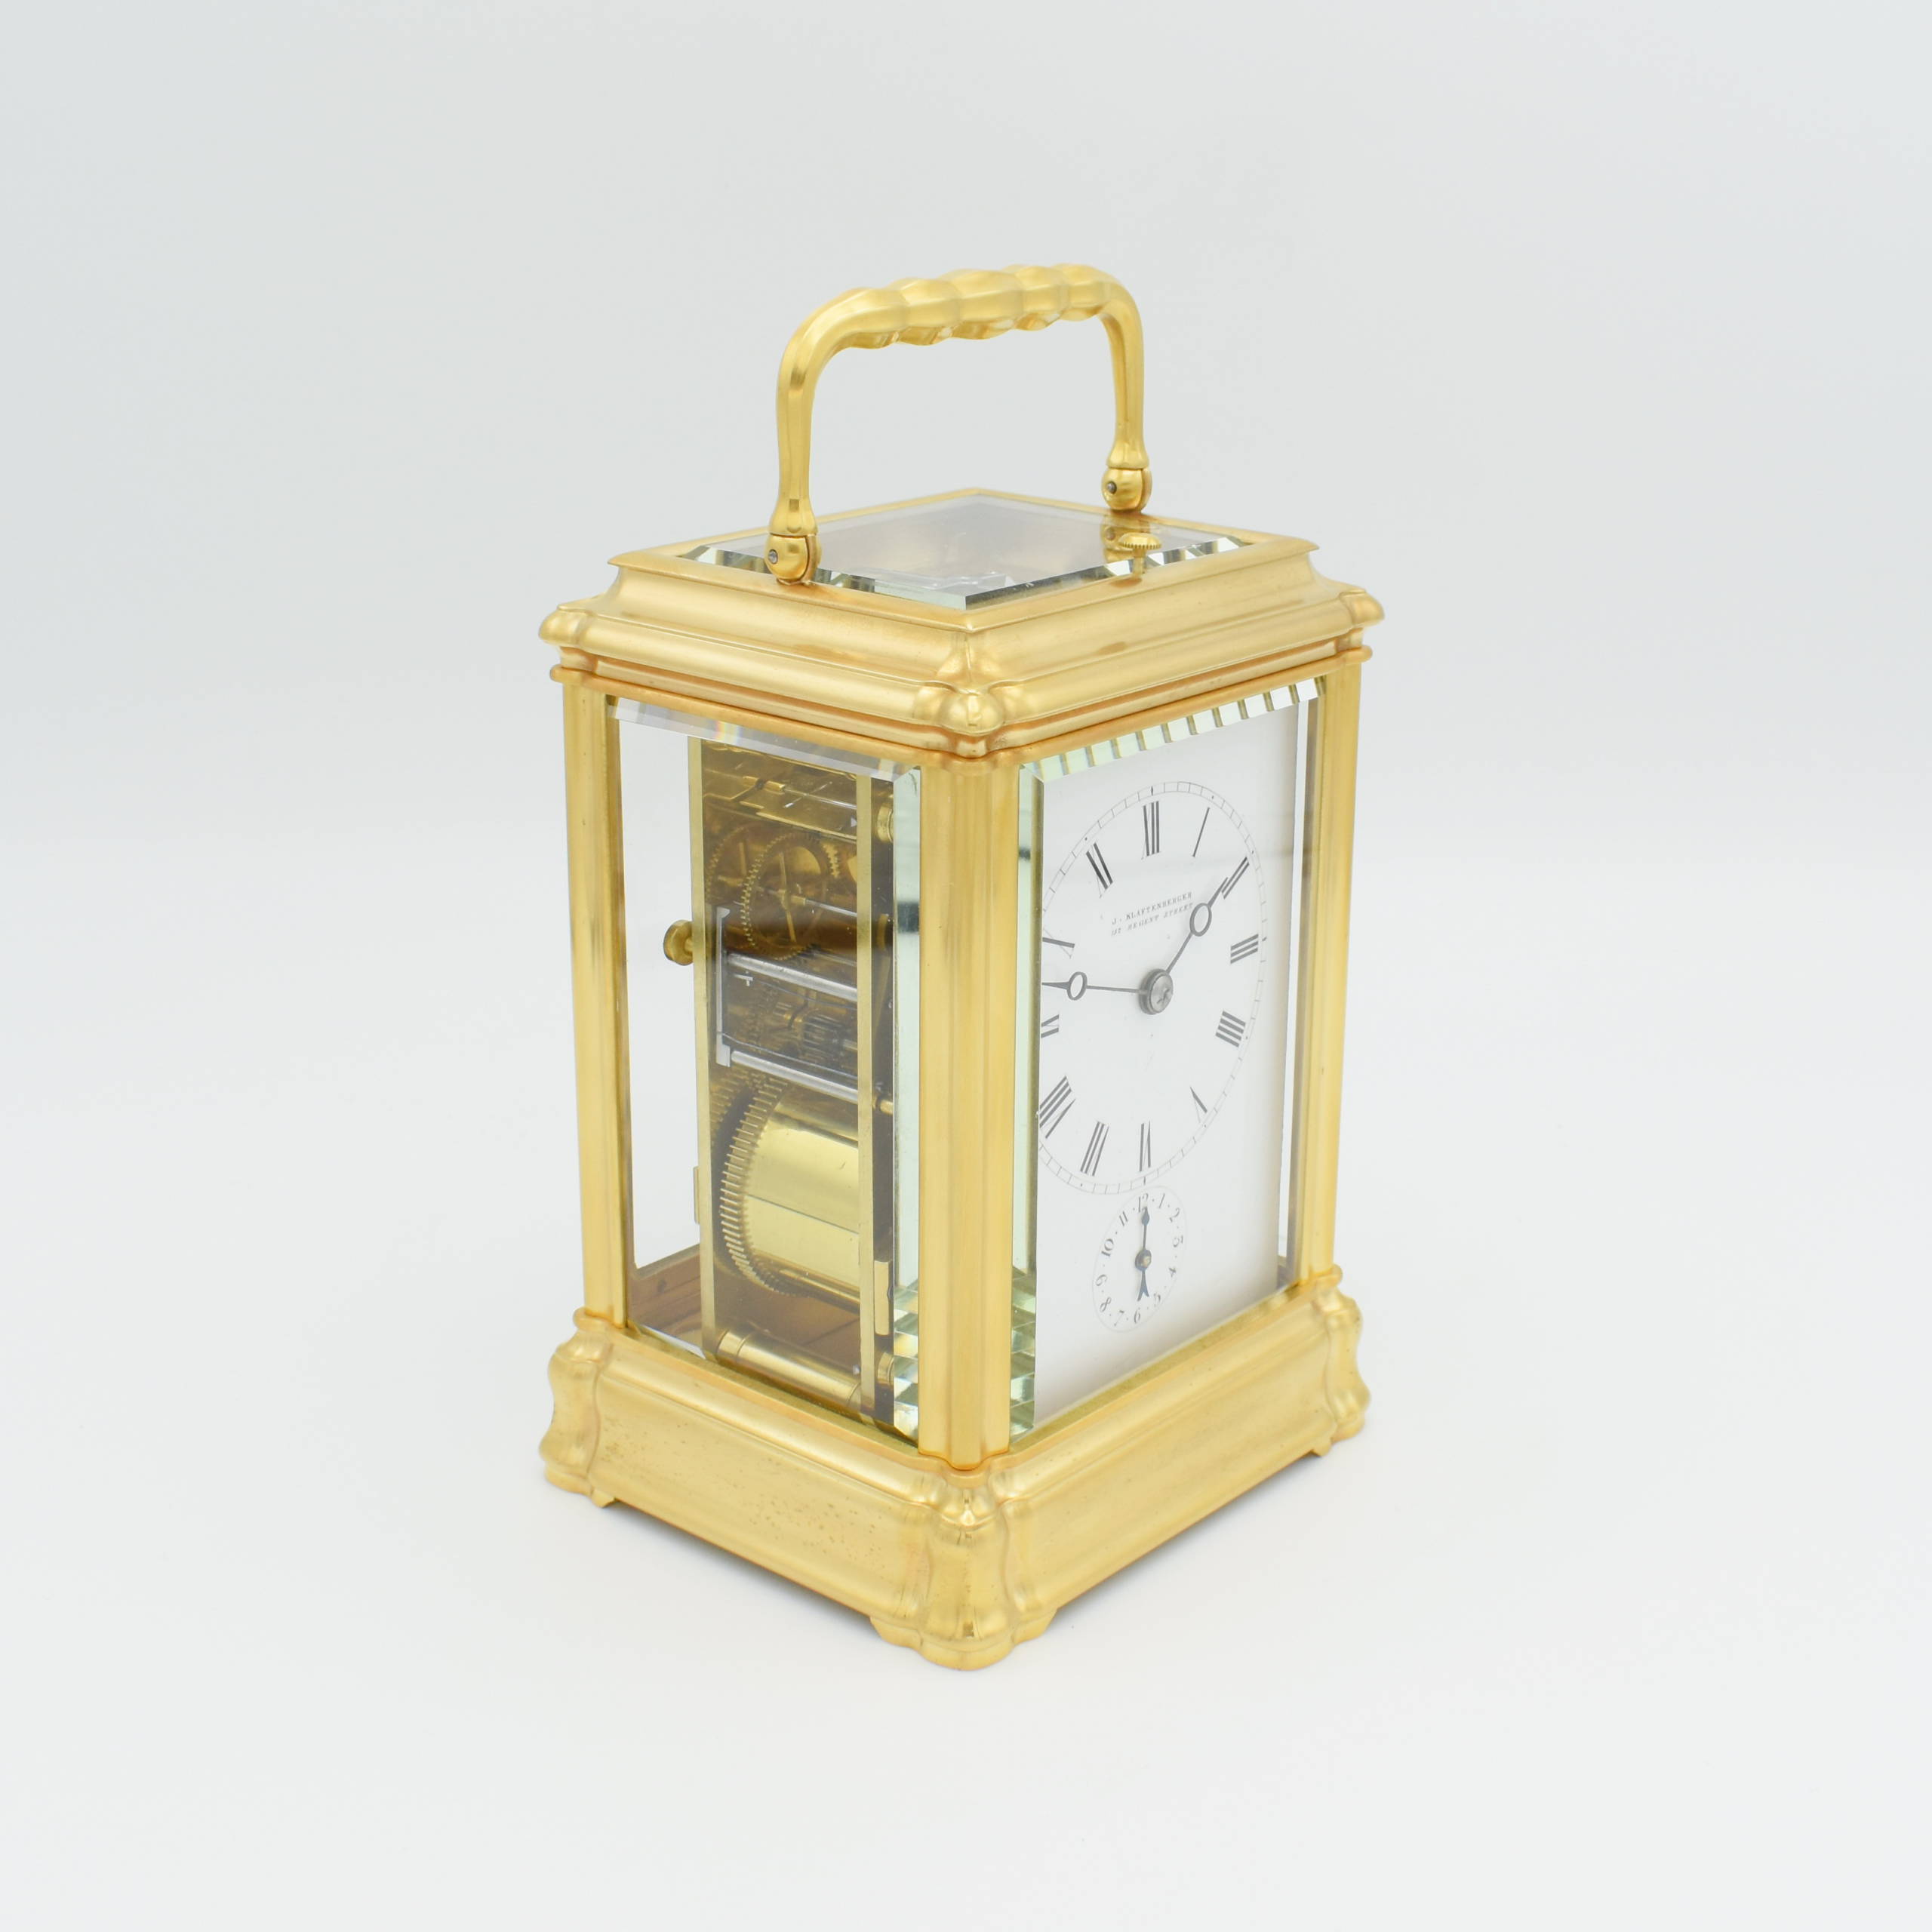 A fine carriage clock by Charles Klaftenberger